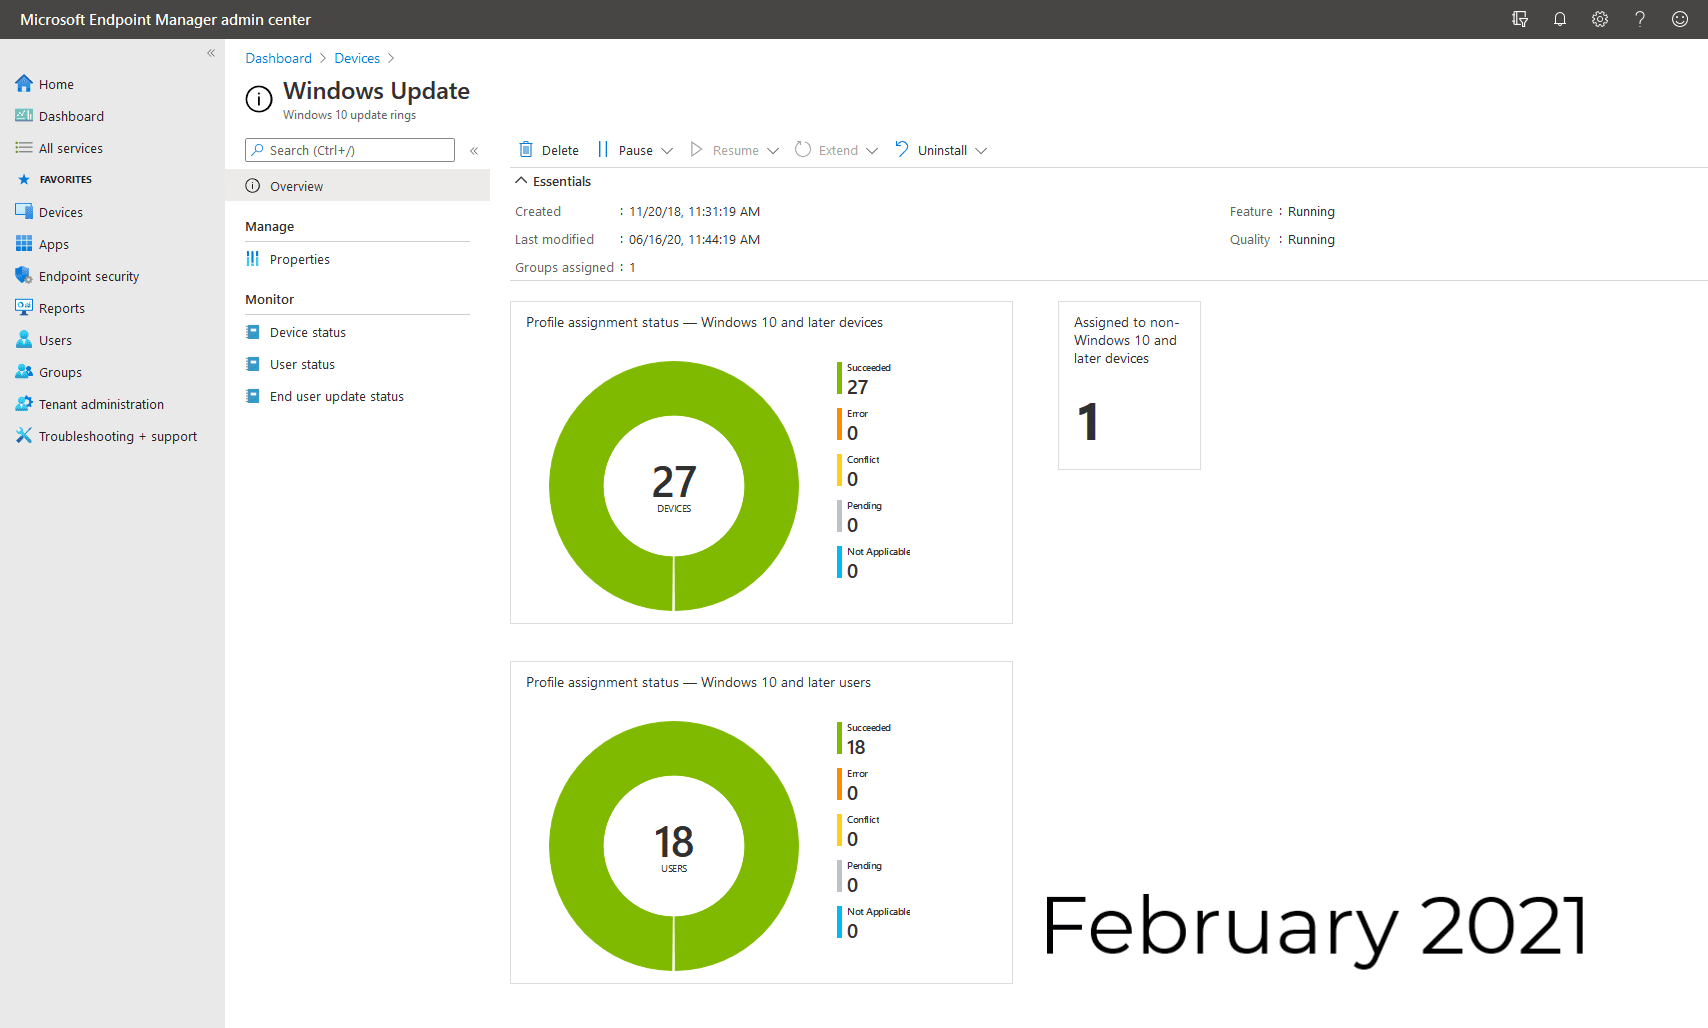 Patch Tuesday February 2021